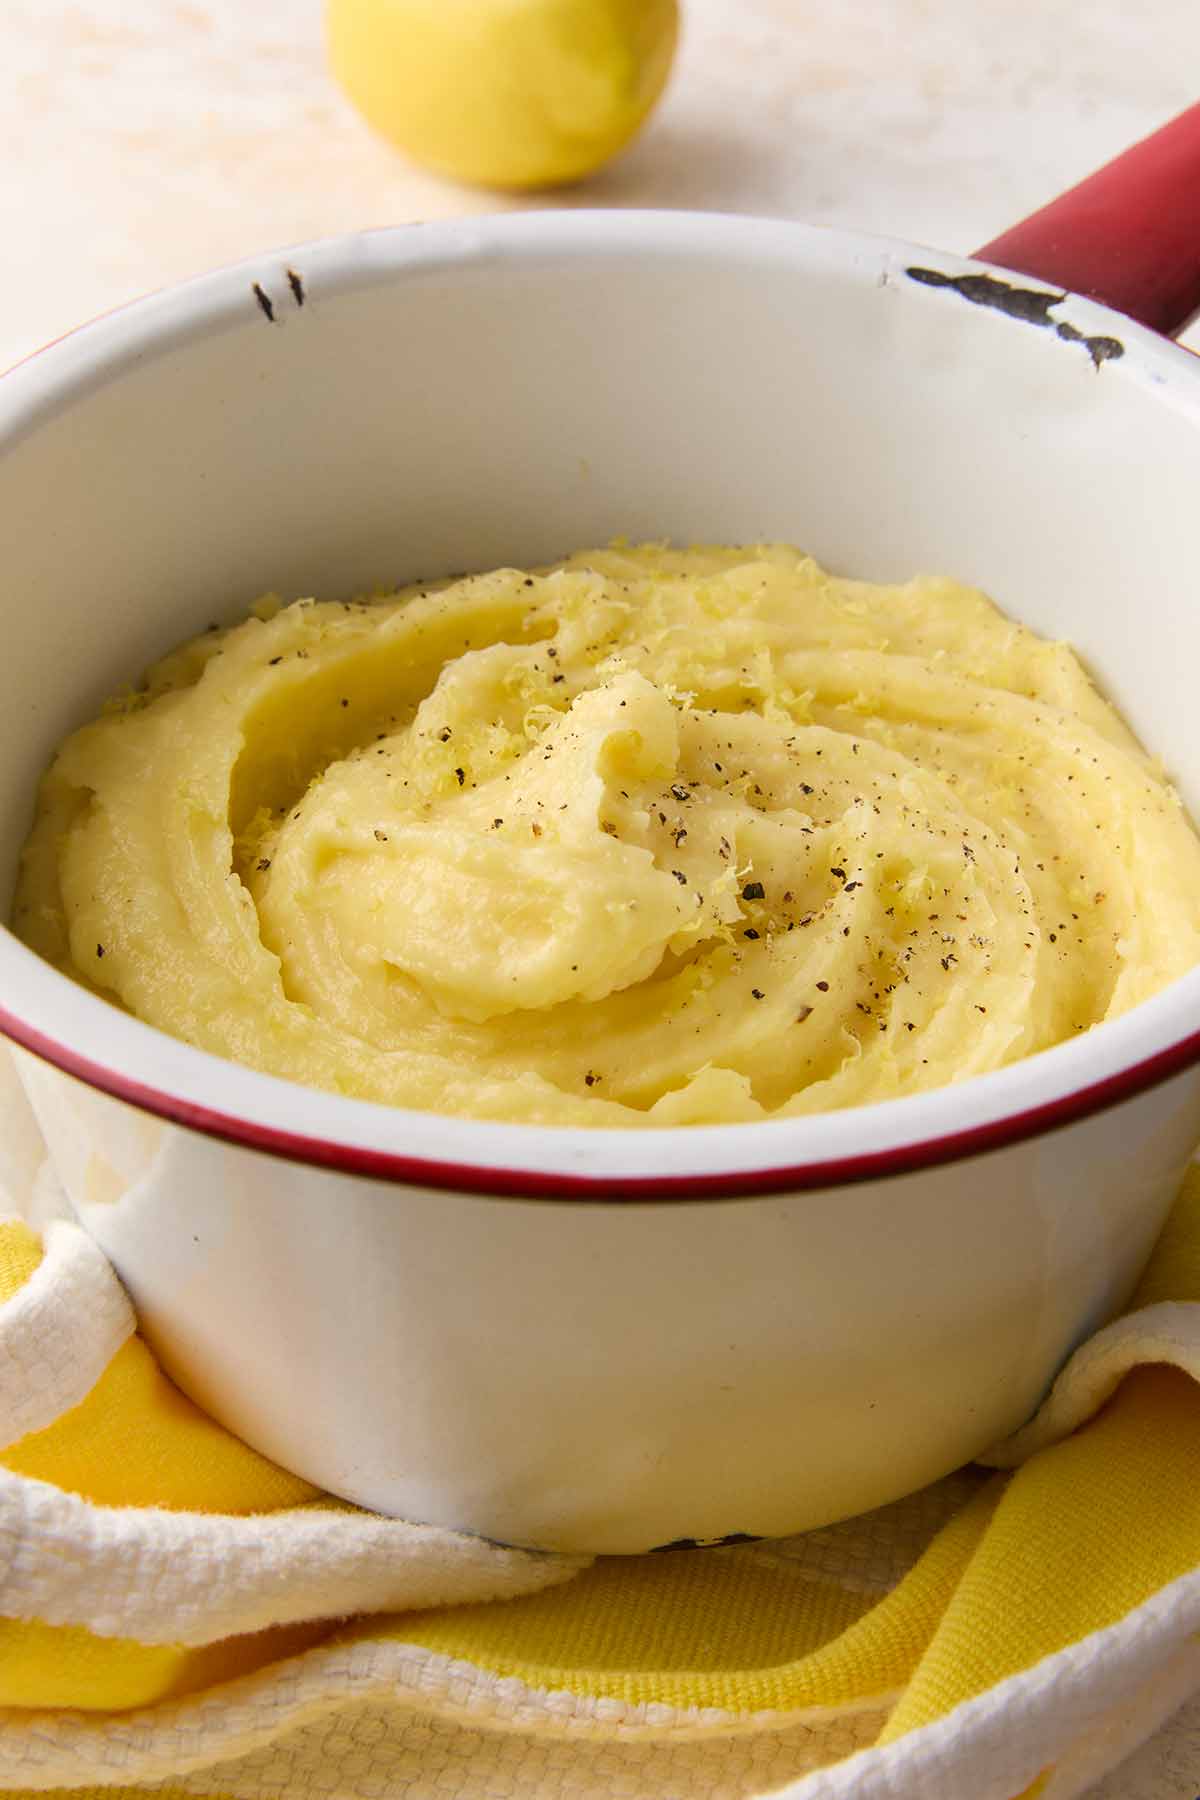 An enamel bowl filled with mashed potatoes, topped with black pepper and lemon zest.